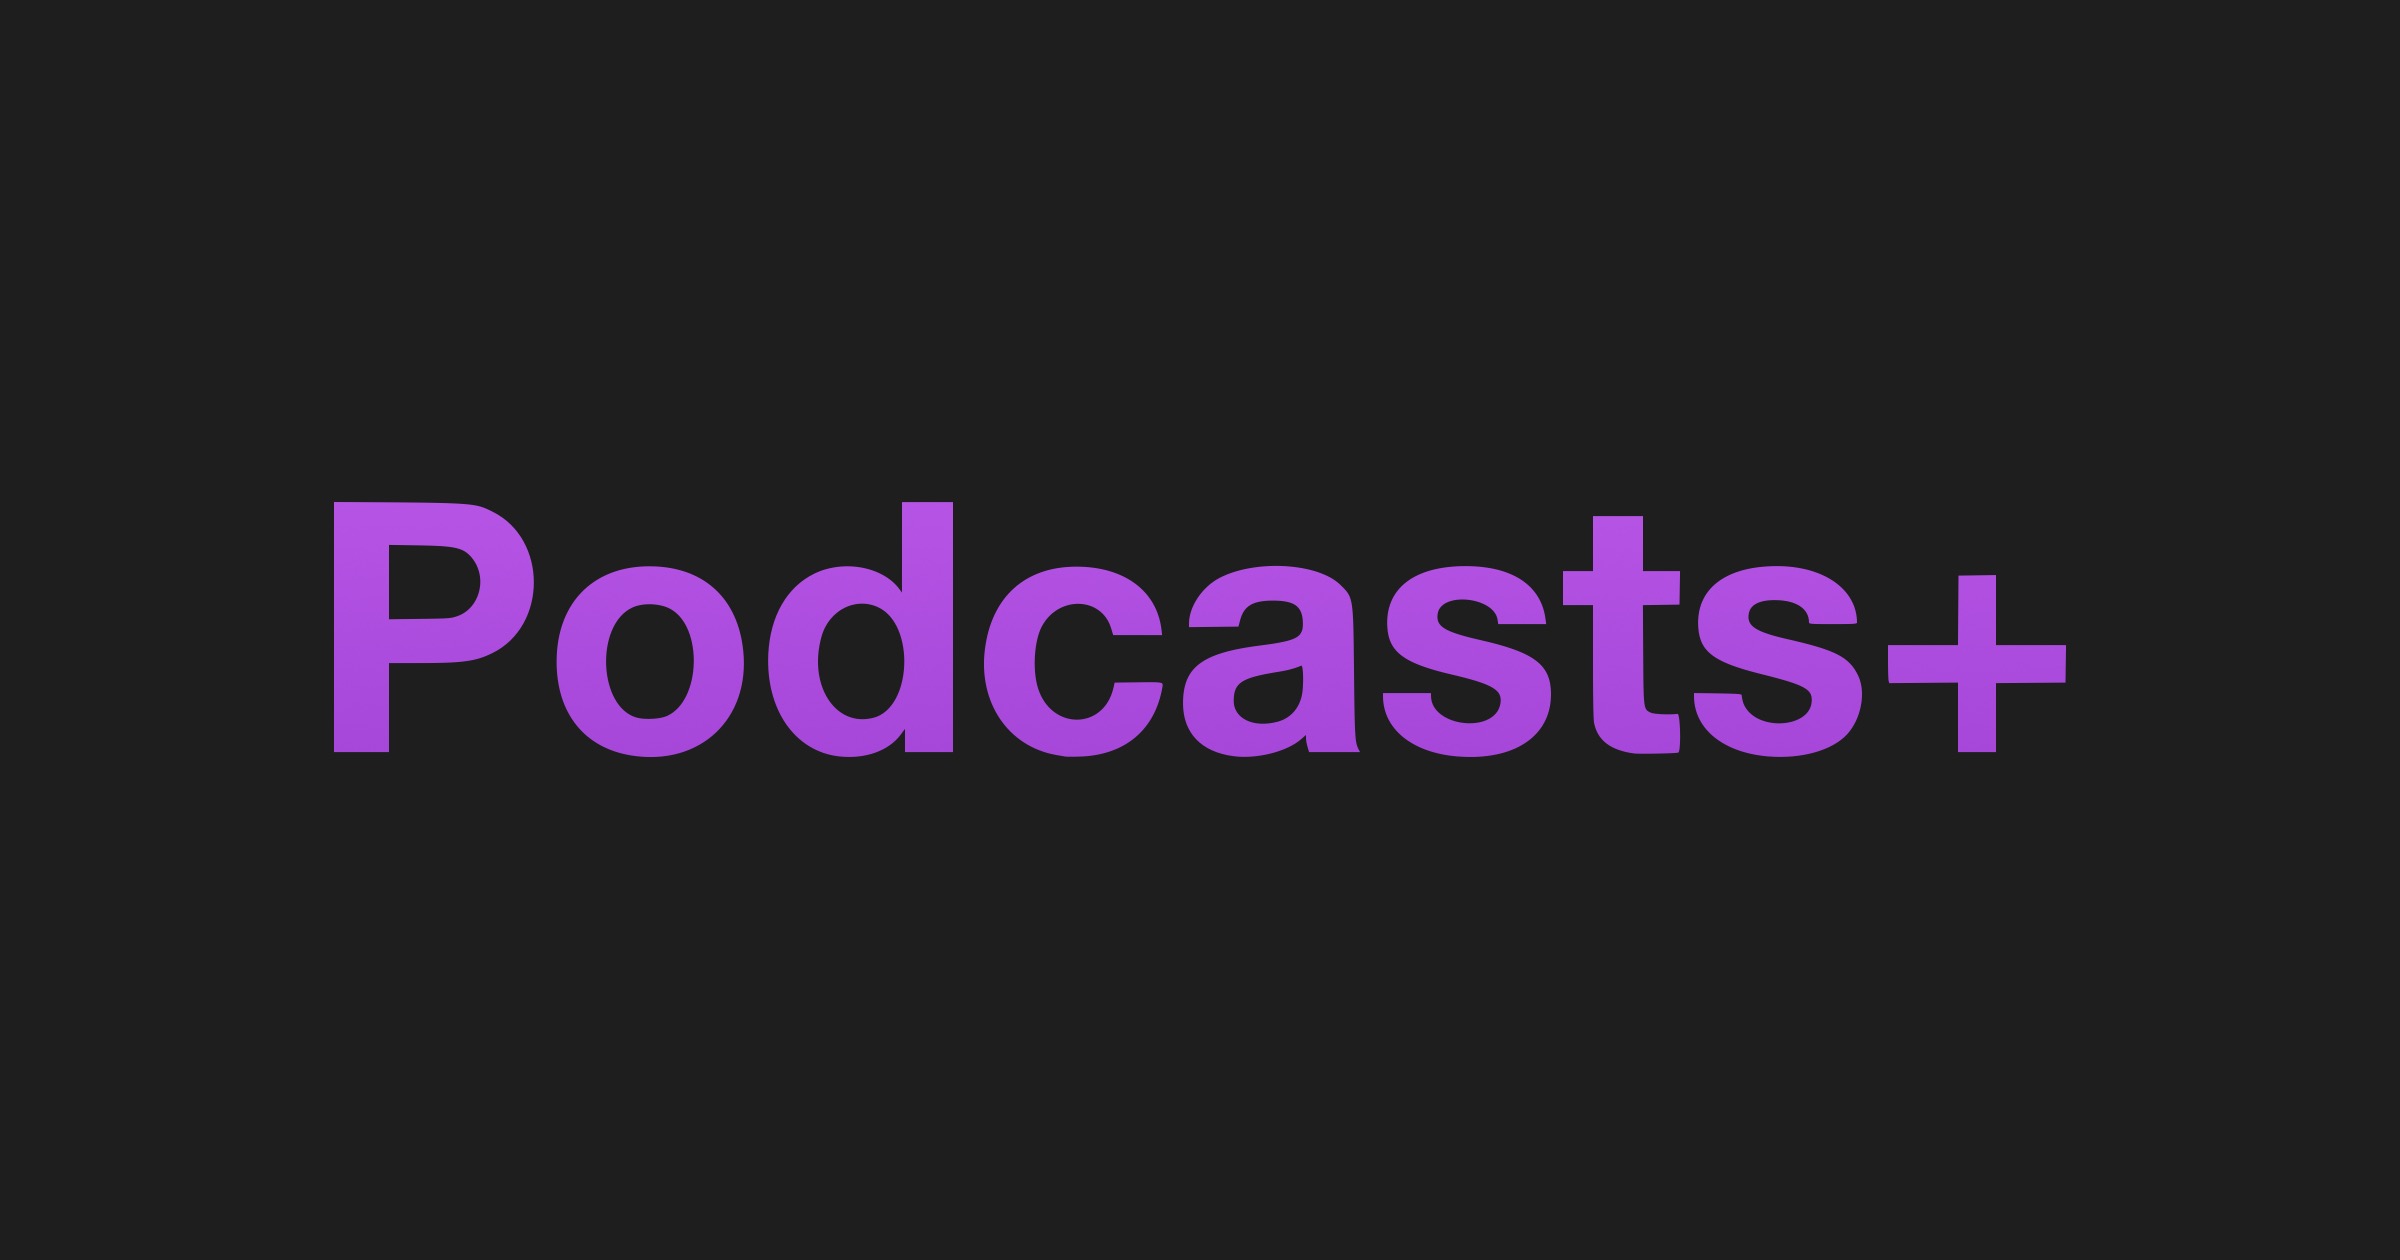 Podcasts+ concept